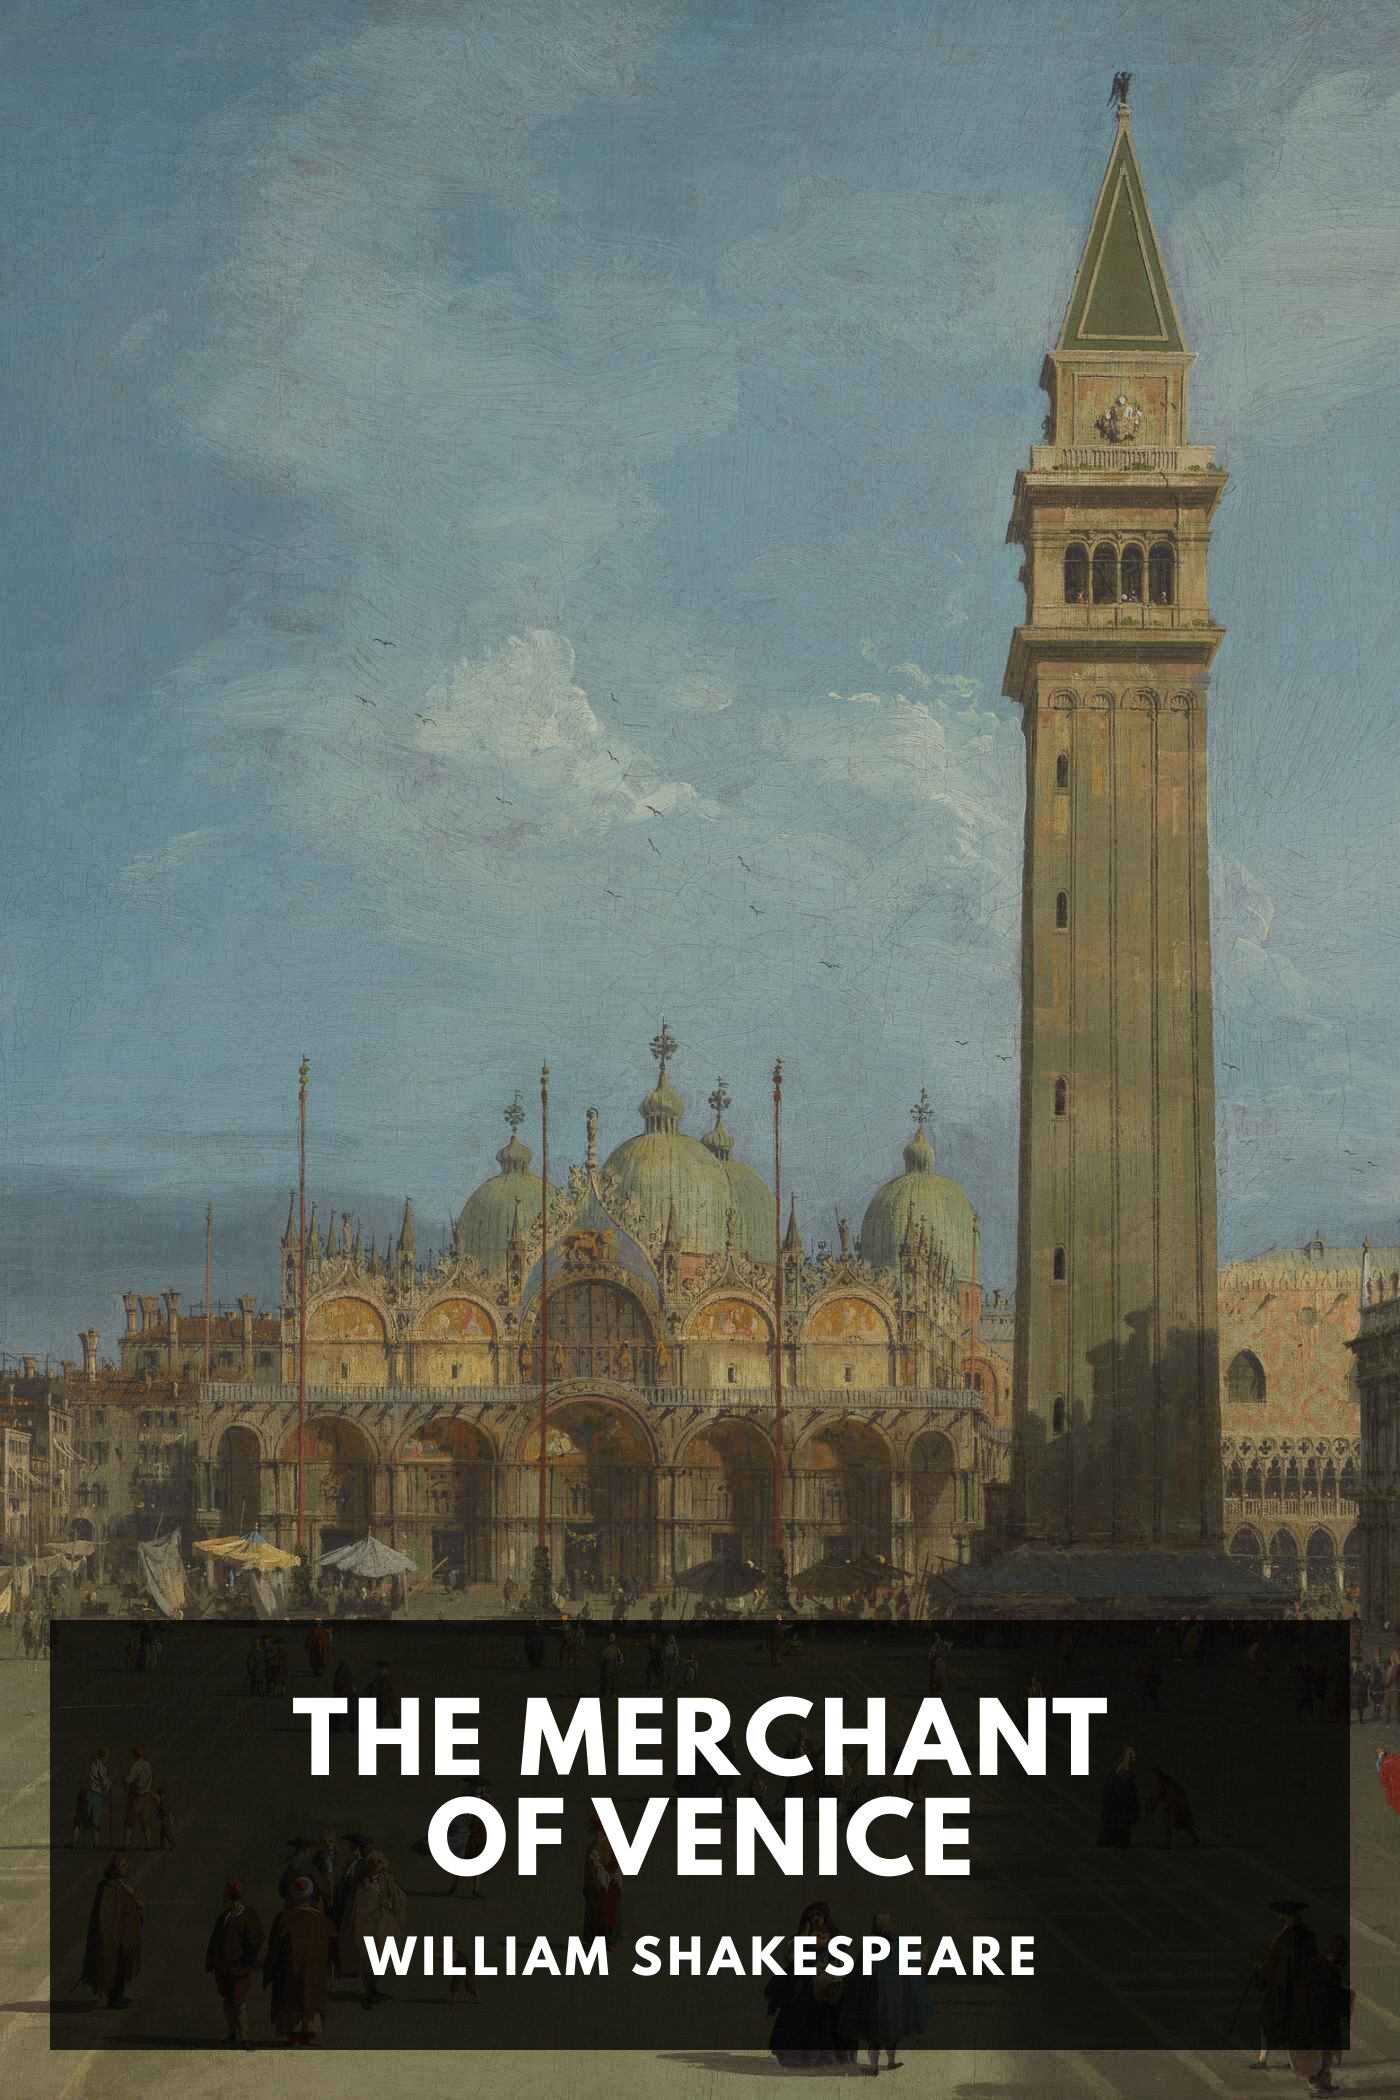 The Merchant of Venice, by William Shakespeare - Free ebook download -  Standard Ebooks: Free and liberated ebooks, carefully produced for the true  book lover.